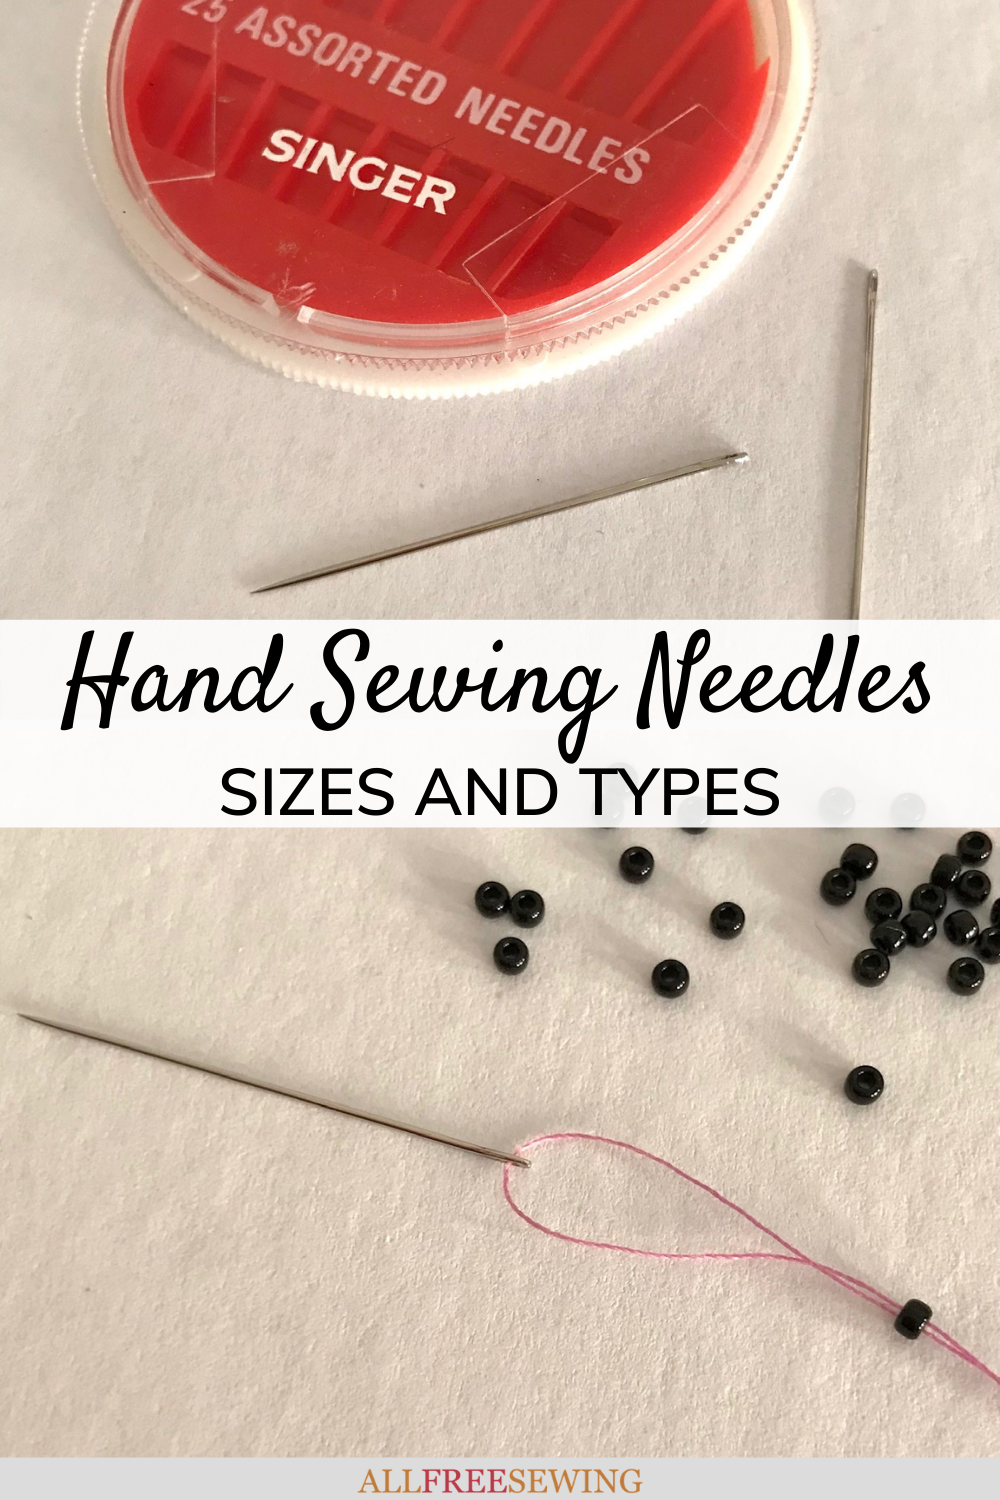 Hand Sewing Needles Guide - The Sewing Directory